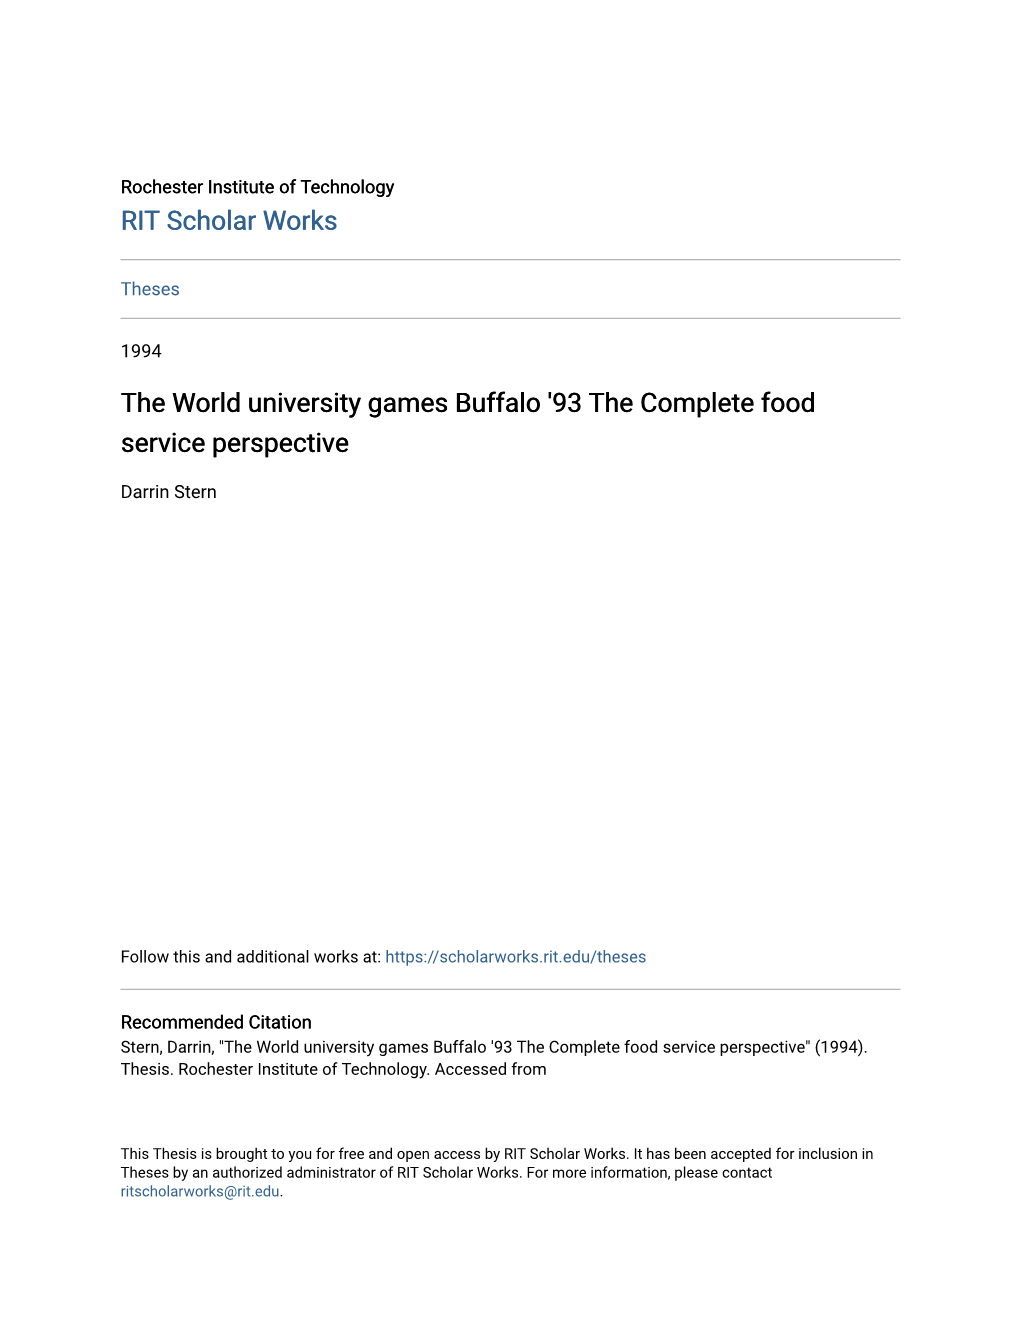 The World University Games Buffalo '93 the Complete Food Service Perspective